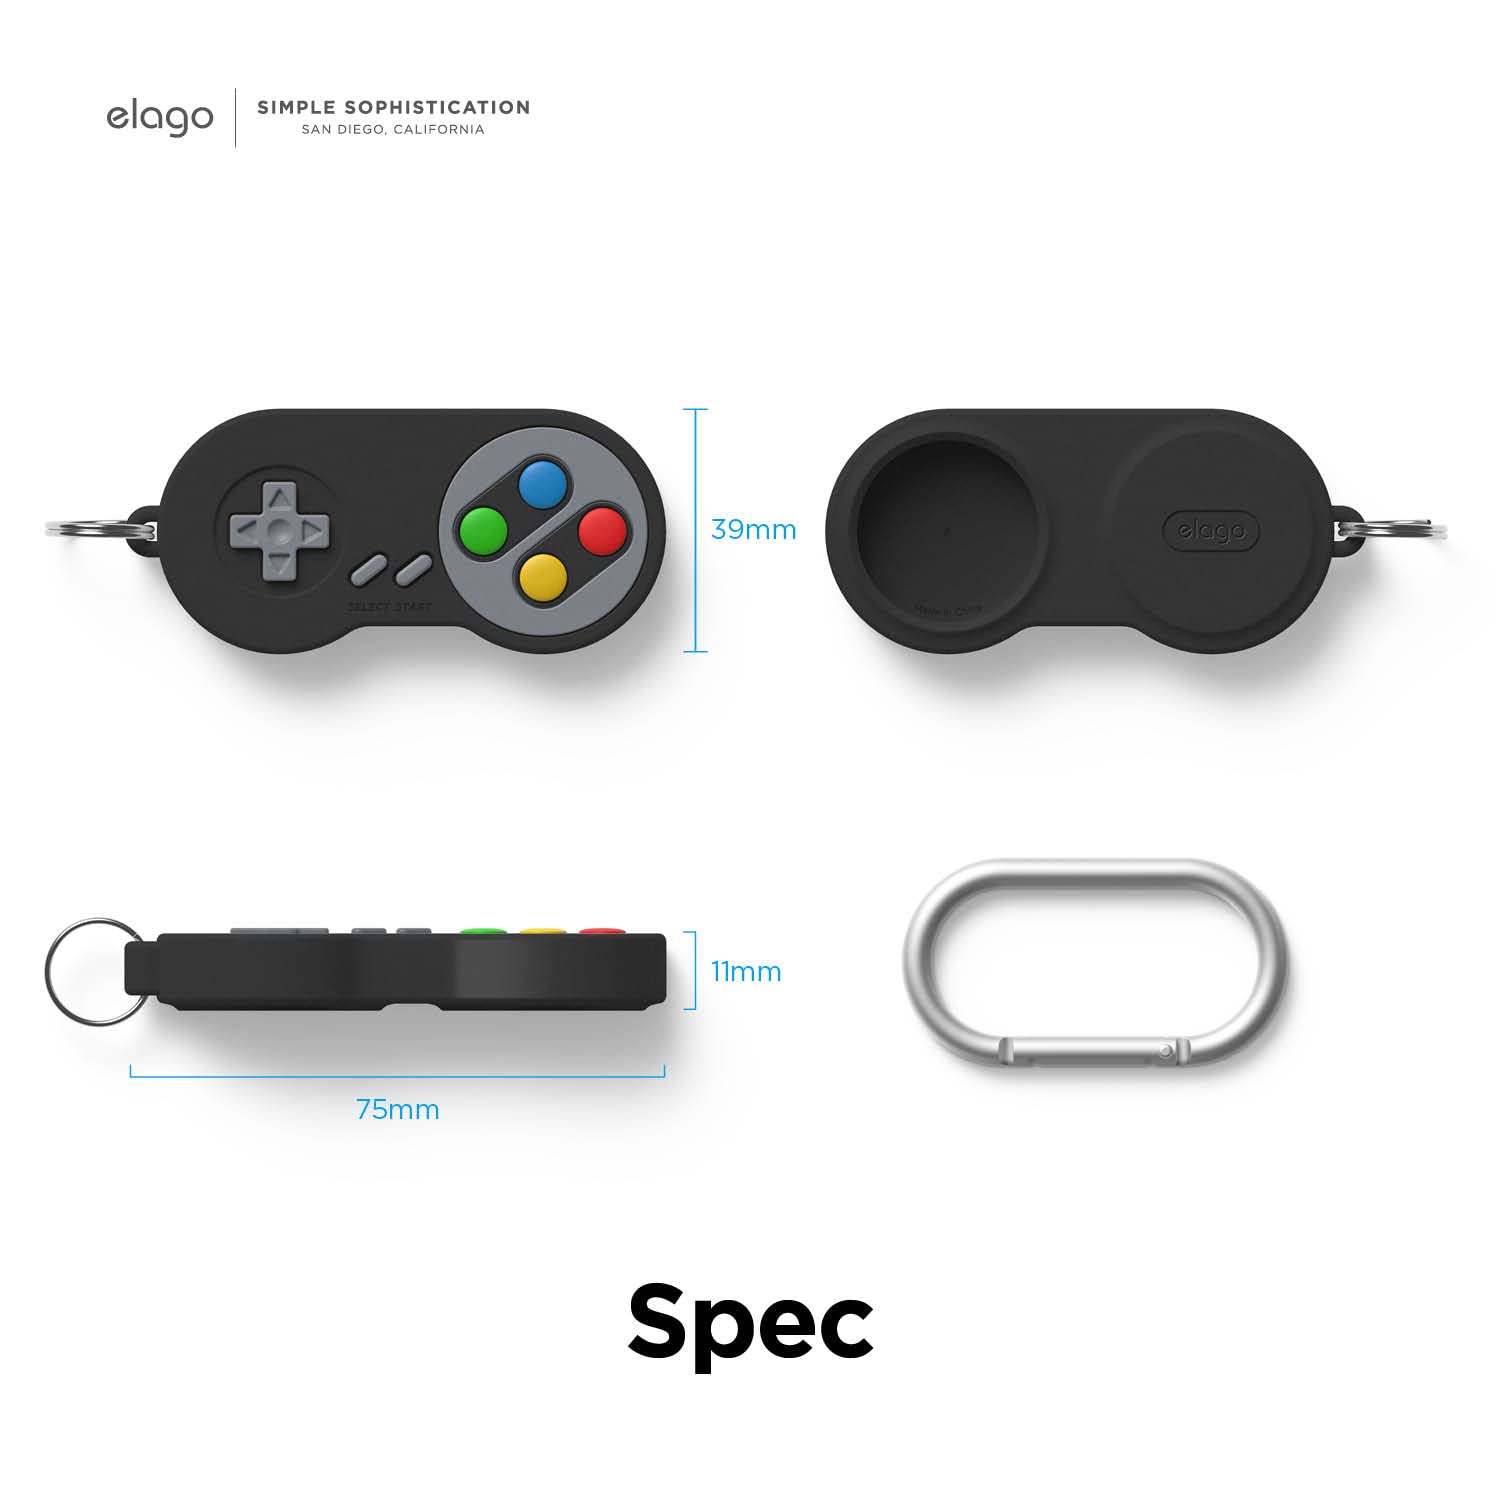 elago W5 Case Keychain Compatible with Apple AirTags - Drop Protection, Carabiner Key Ring, Classic Handheld Gaming Console Design (Track Dogs, Keys, Backpacks, Purses) Device Not Included [Black]